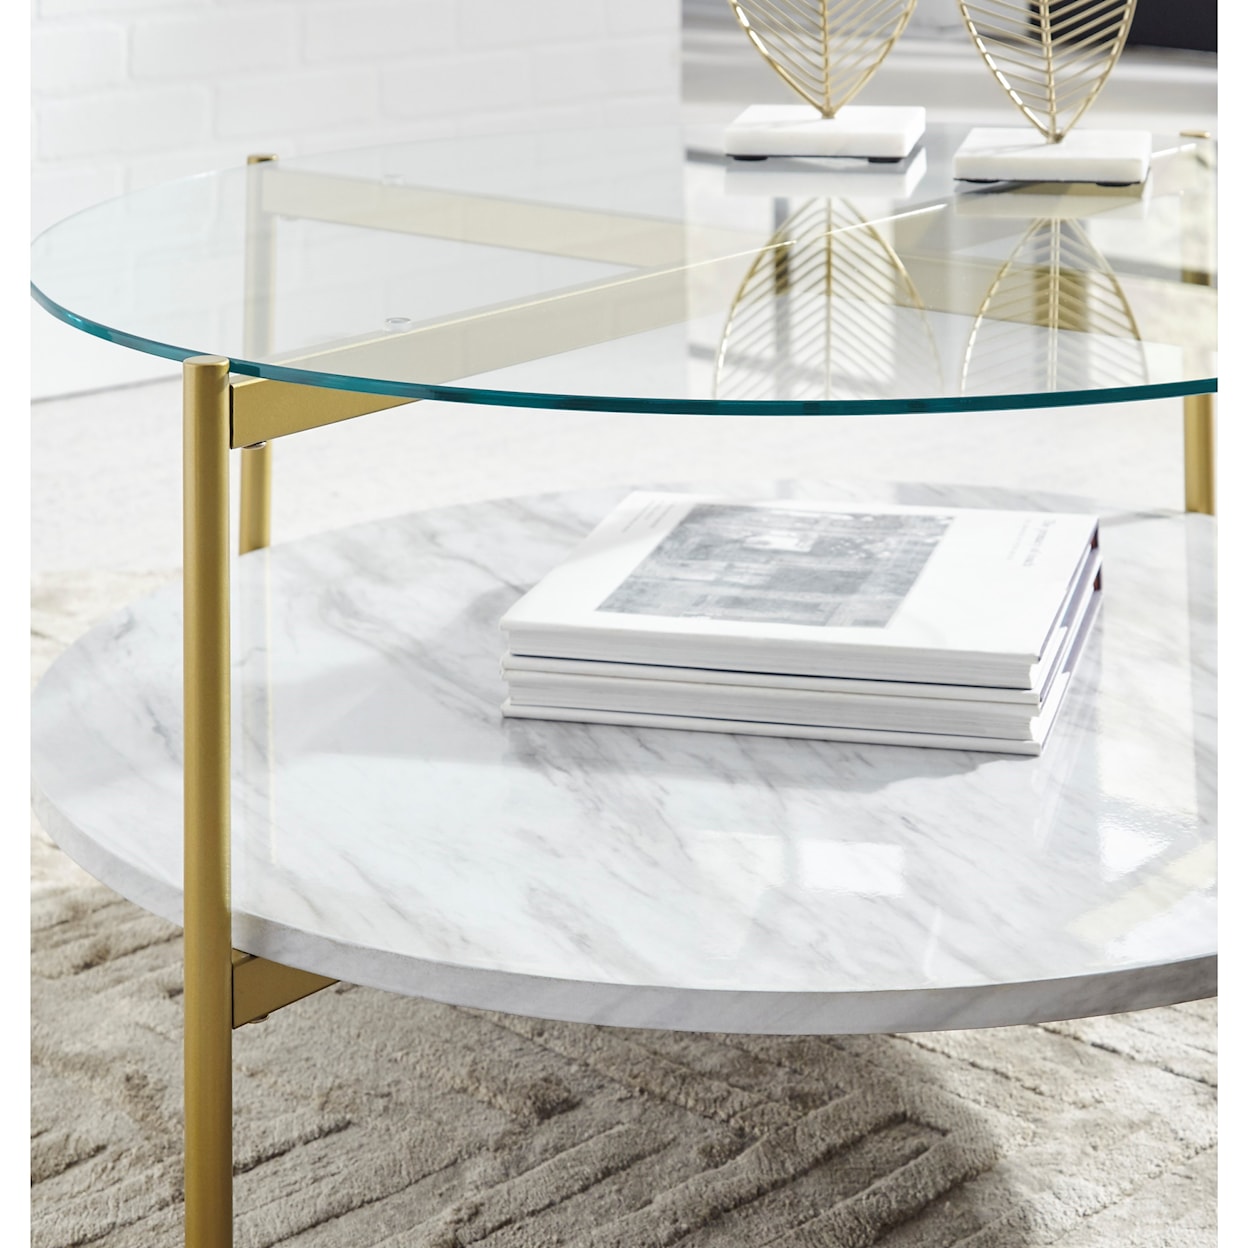 Belfort Select Wynora Round Cocktail Table